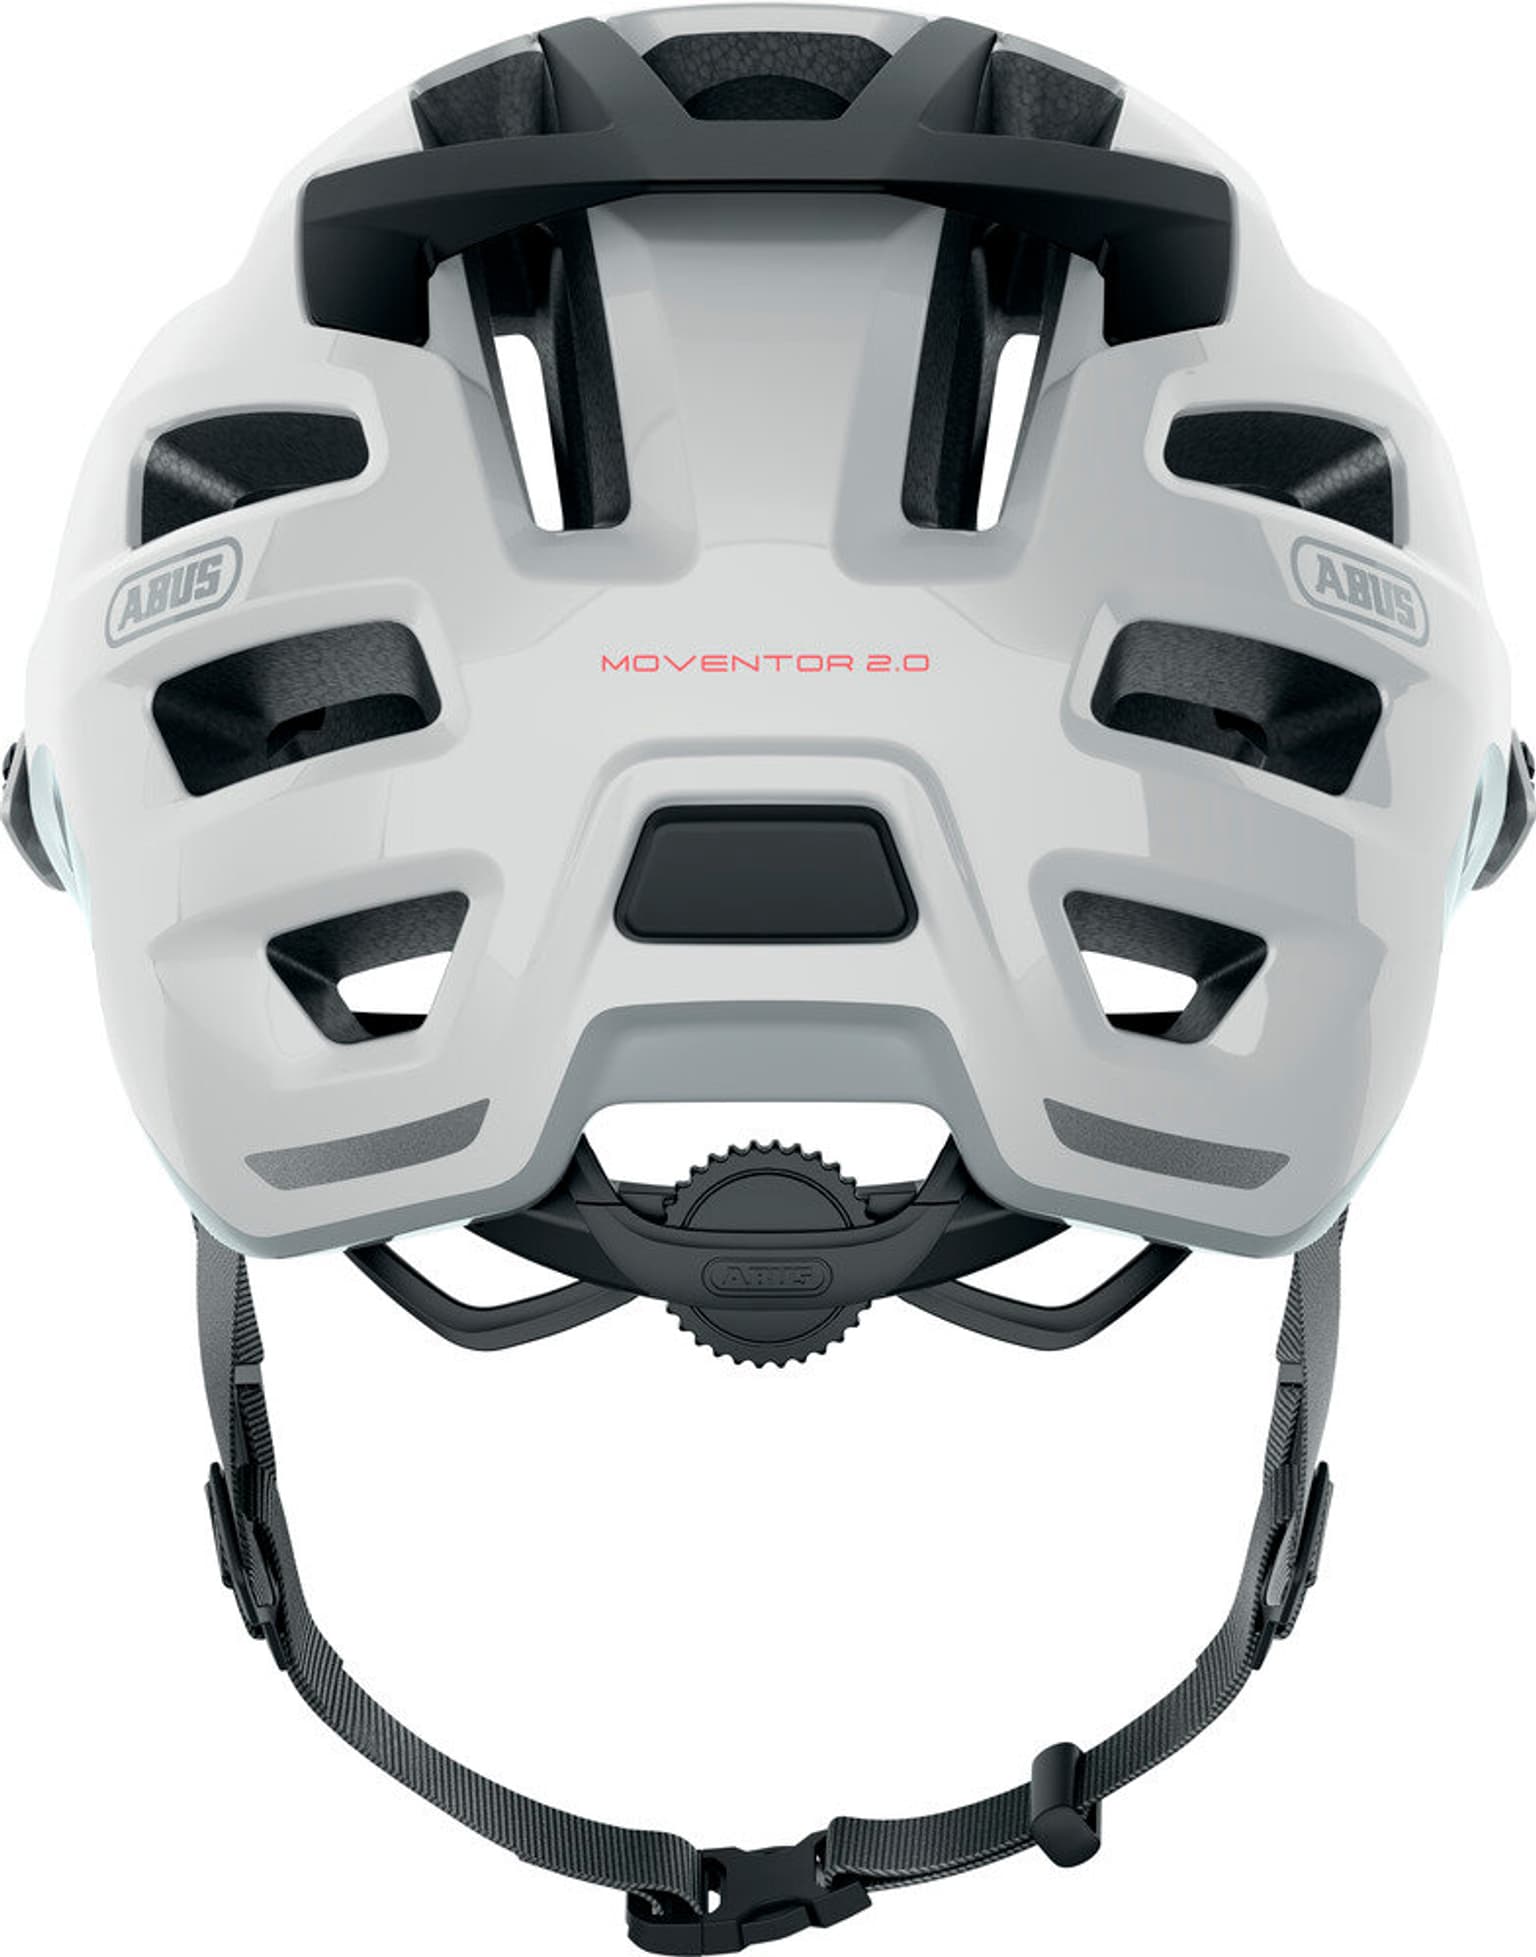 Abus Abus Moventor 2.0 Velohelm weiss 3